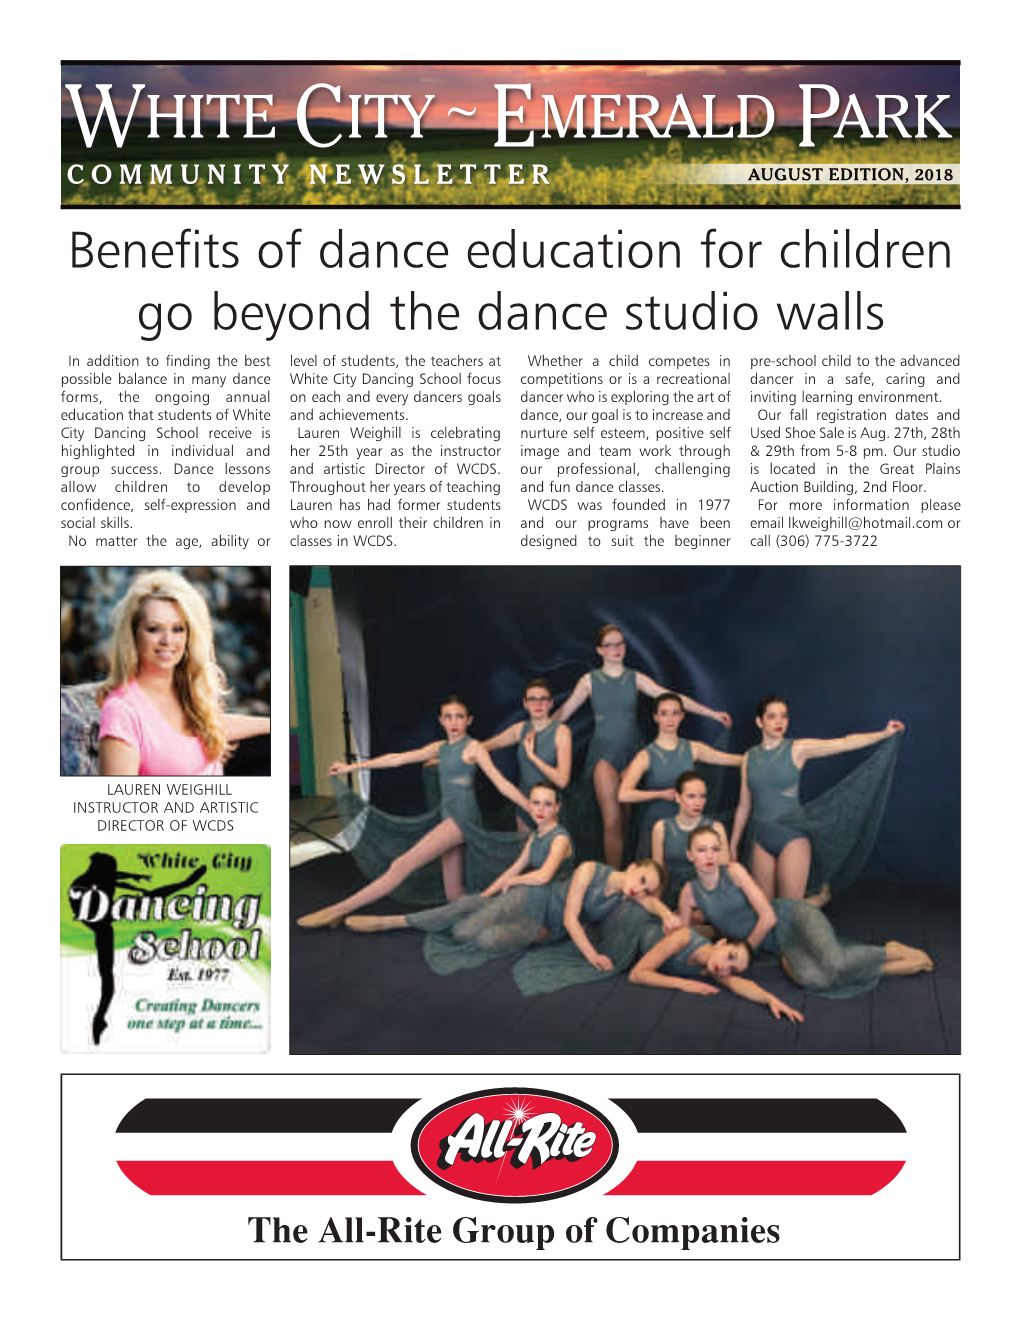 Benefits of Dance Education for Children Go Beyond the Dance